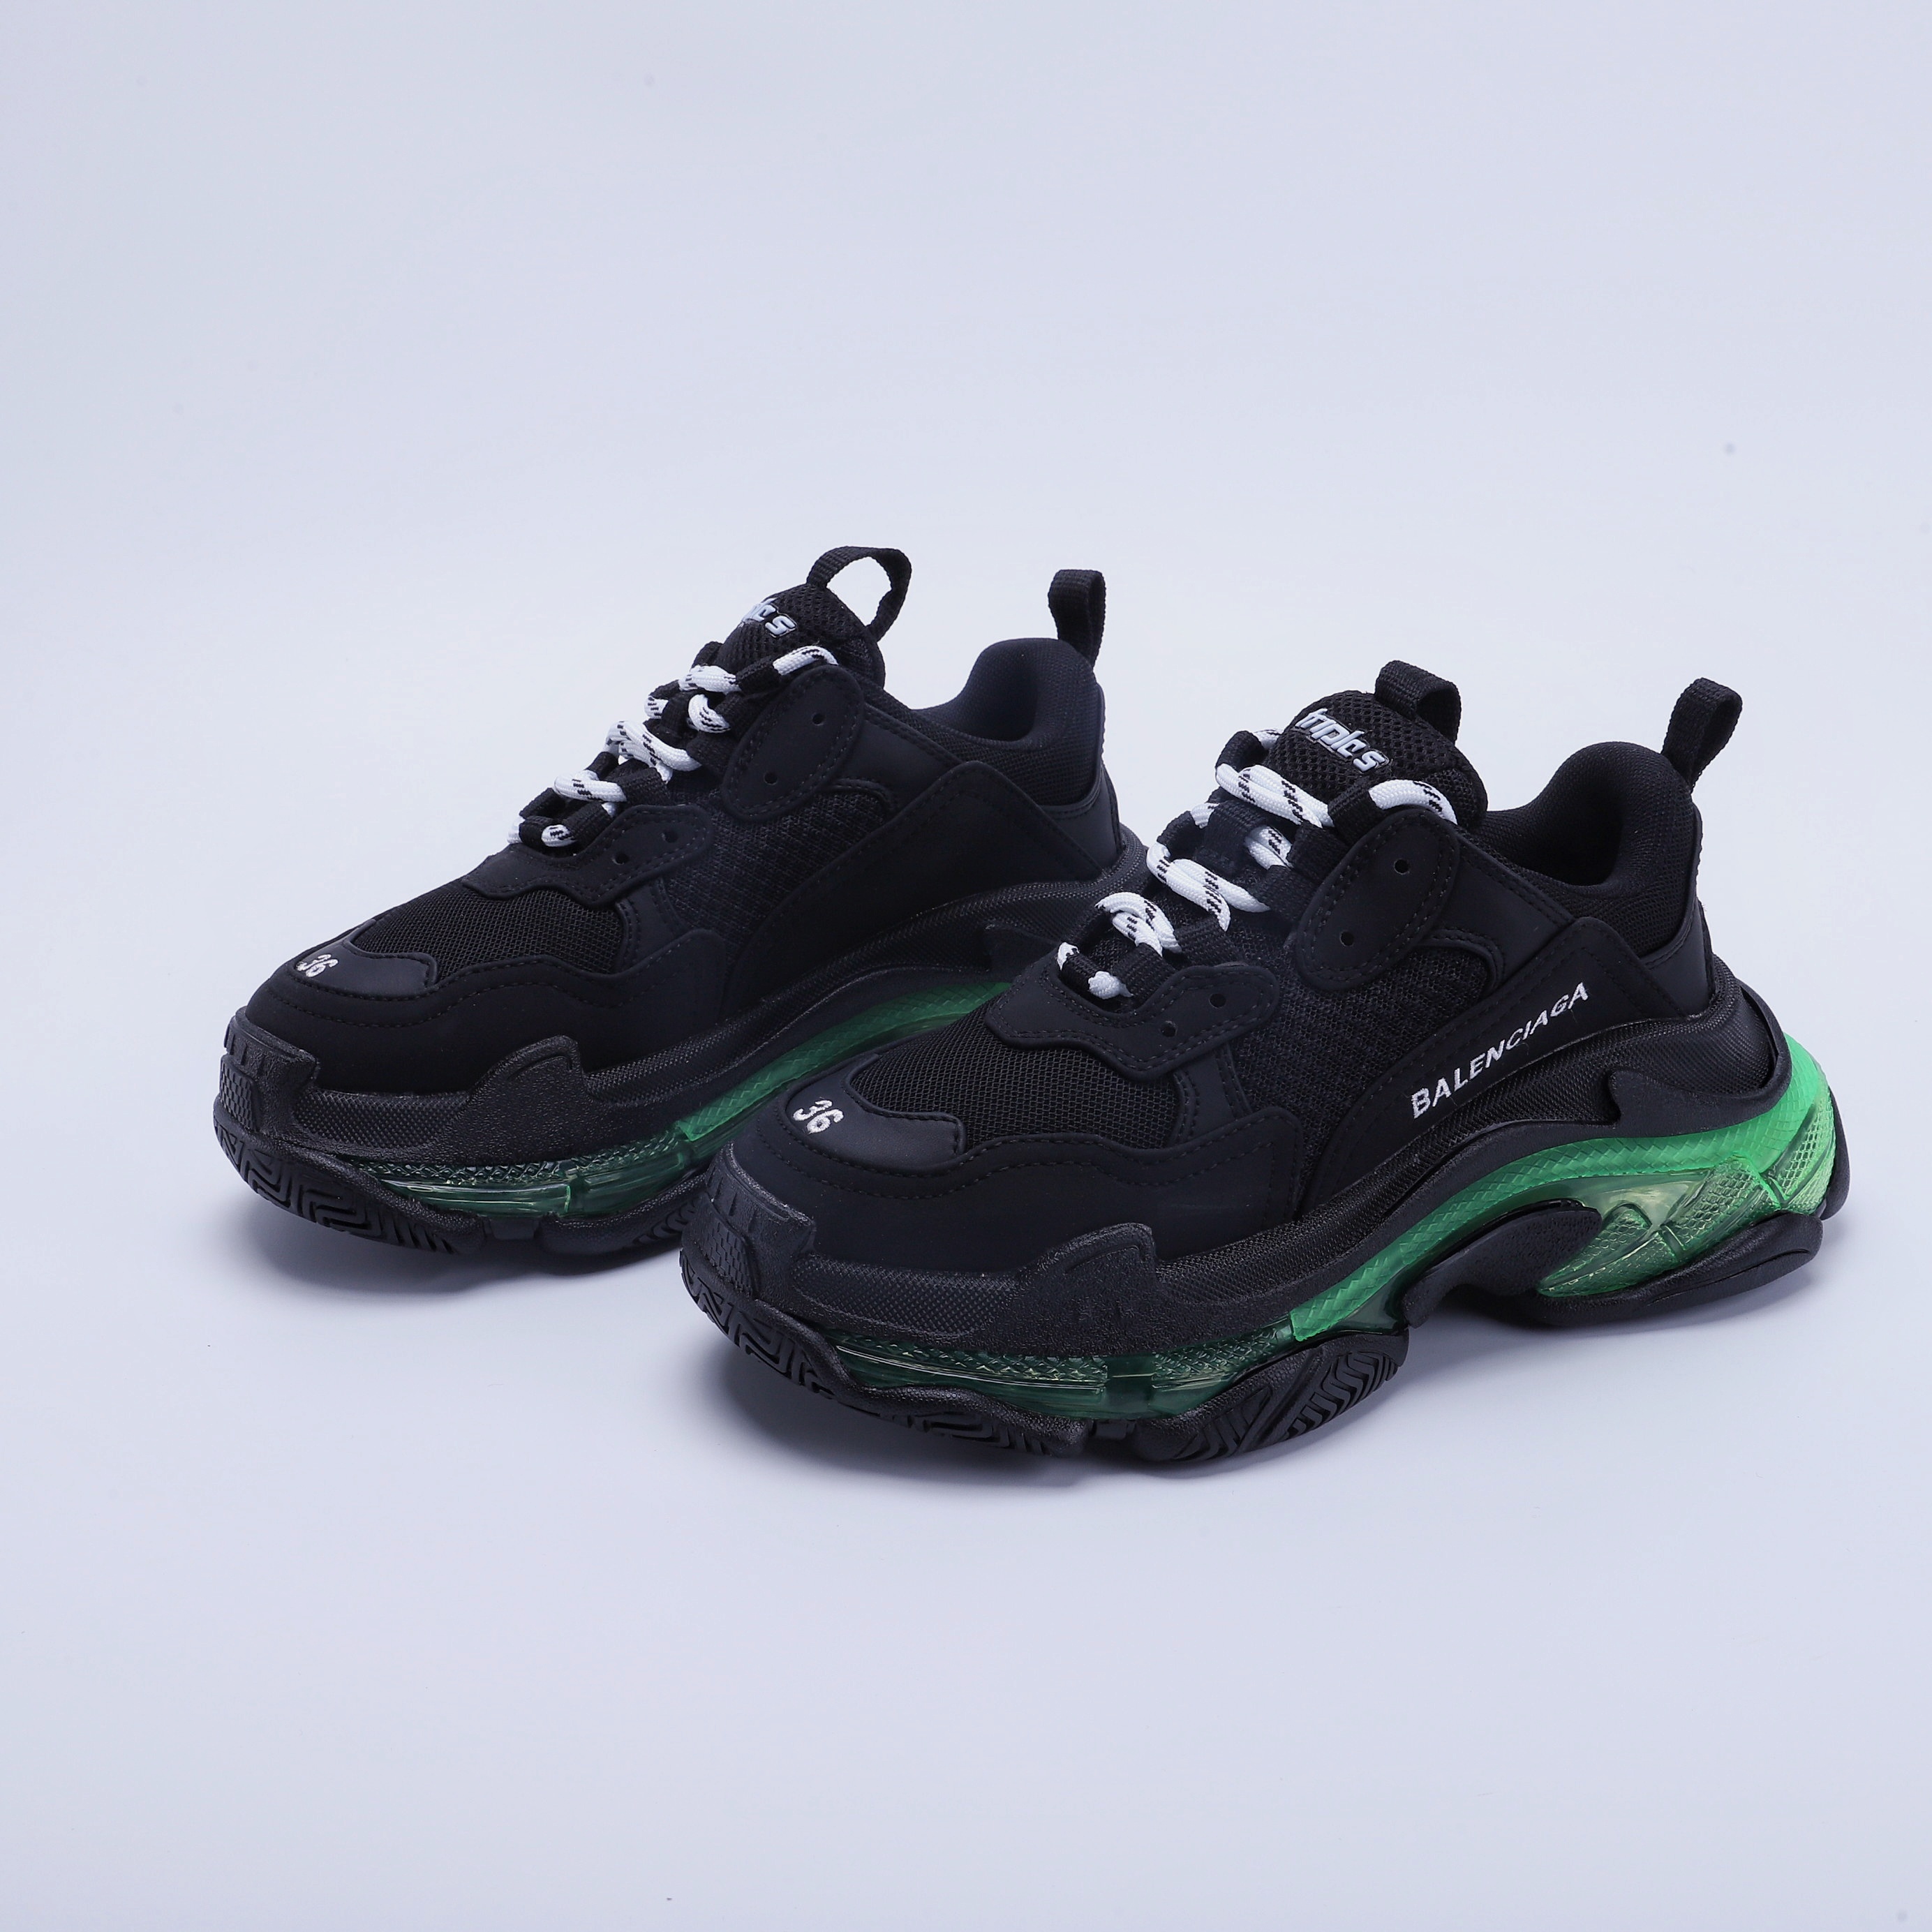 Triple S Clear Sole Black and Green Shuangpin